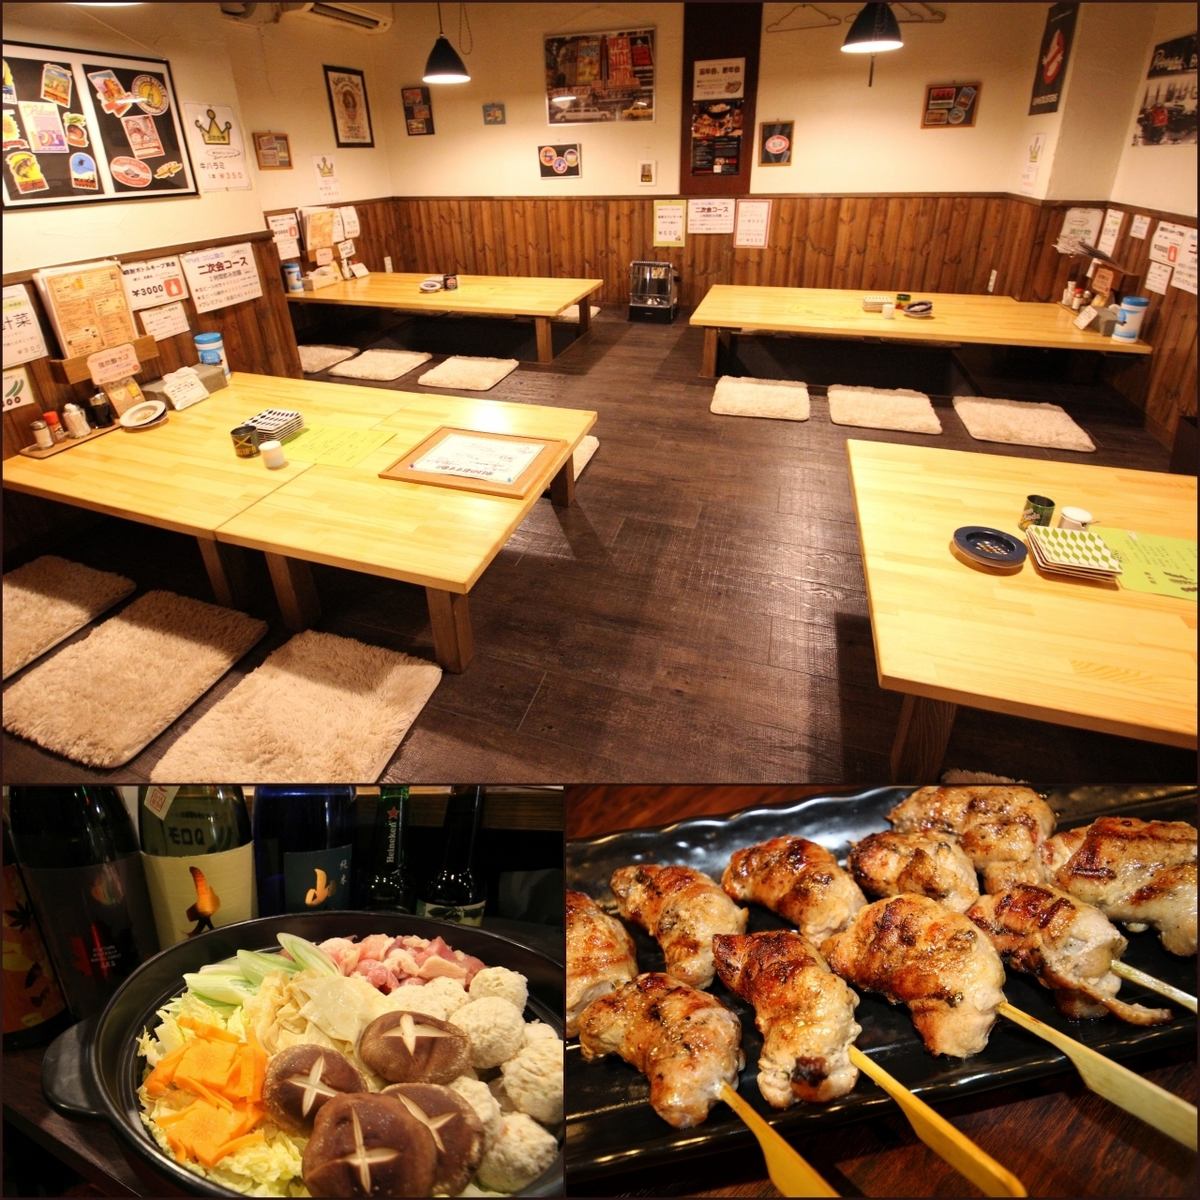 ≪Course with all-you-can-drink starting from 4,000 yen≫ Comfortable kotatsu seats are also available ☆